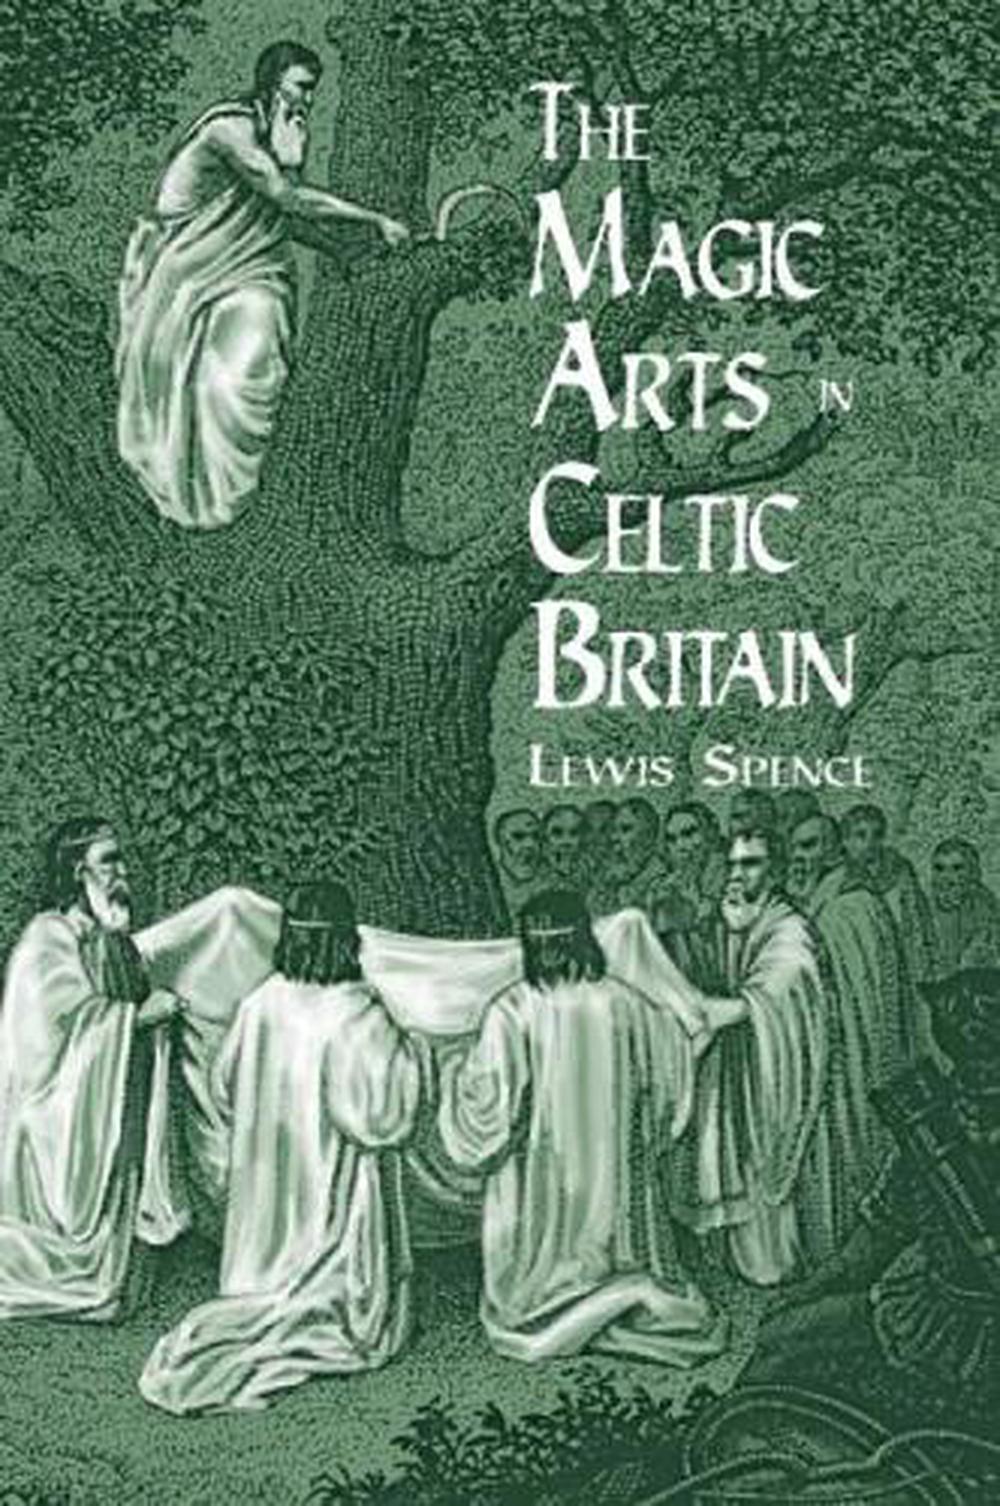 The Magic Arts in Celtic Britain by Lewis Spence (English) Paperback